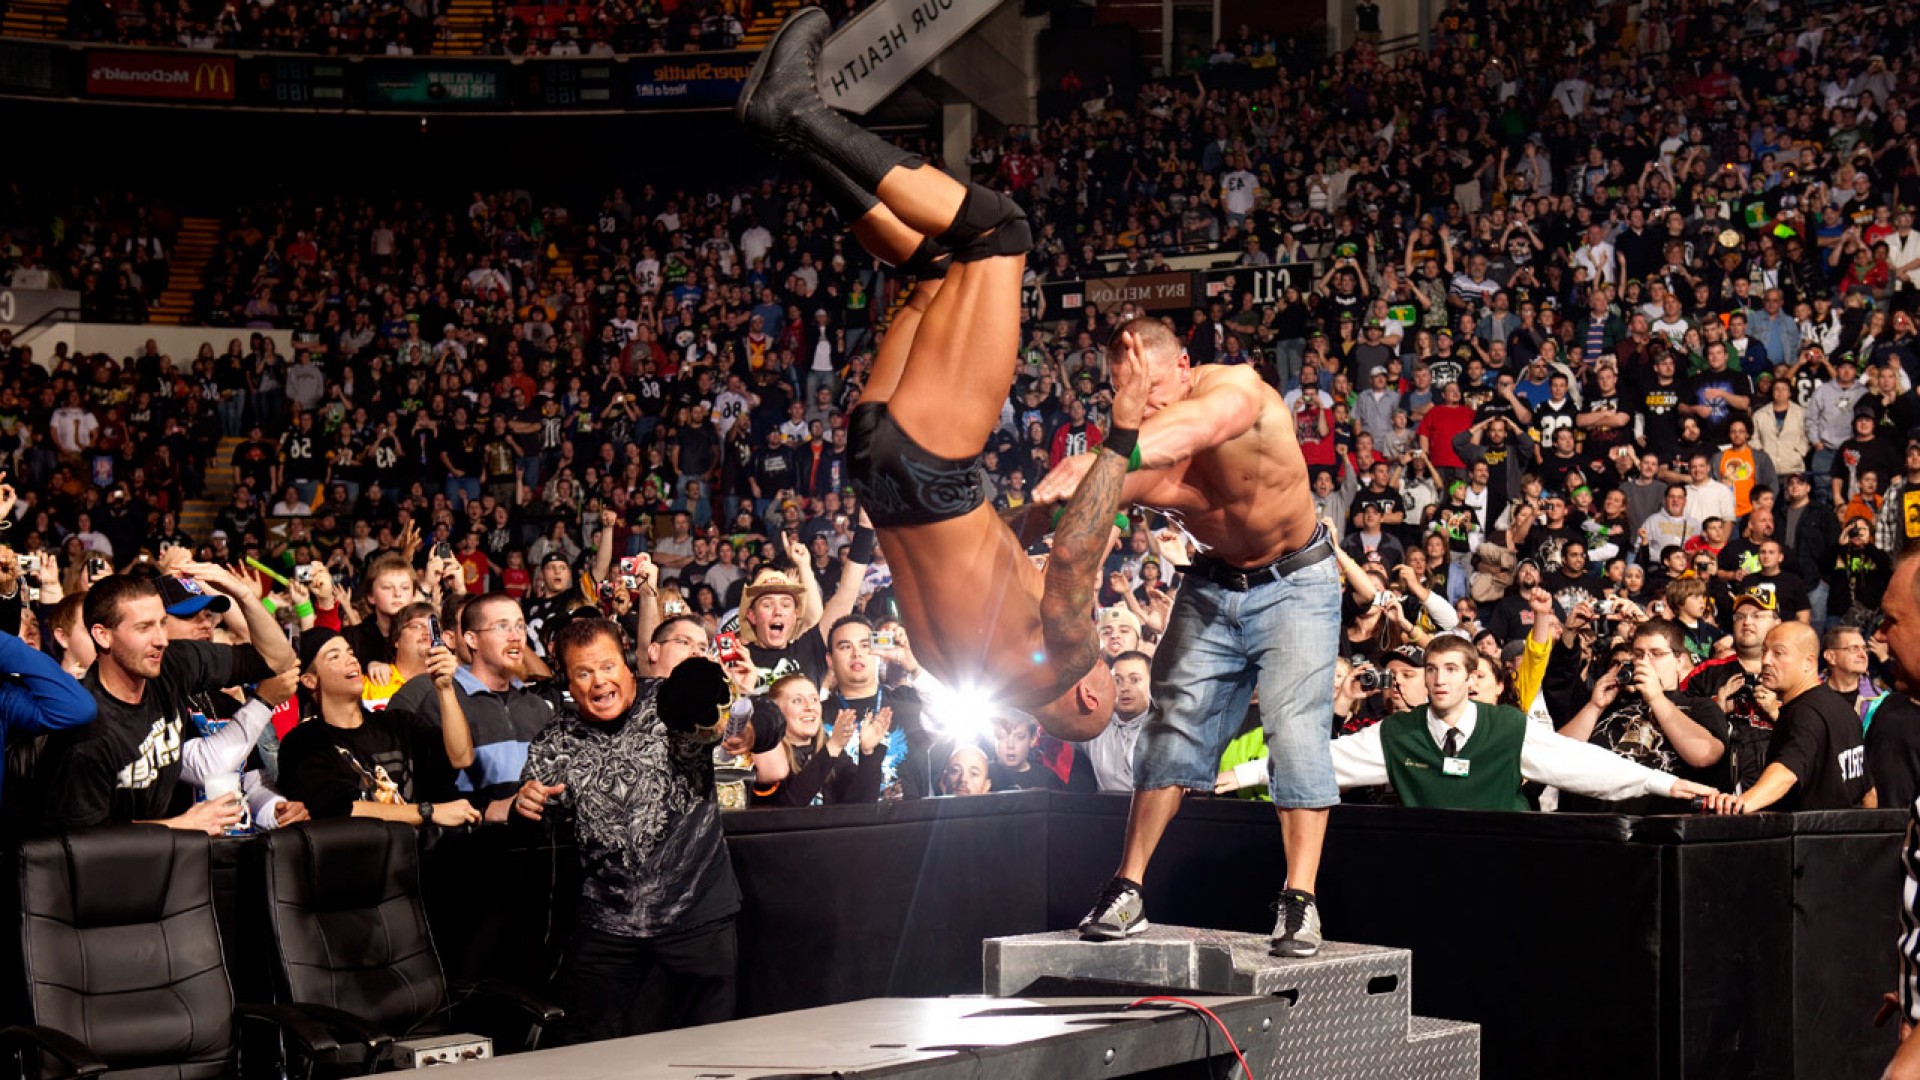 John Cena Fight Against The Rock Wwe HD Wallpaper Search More High